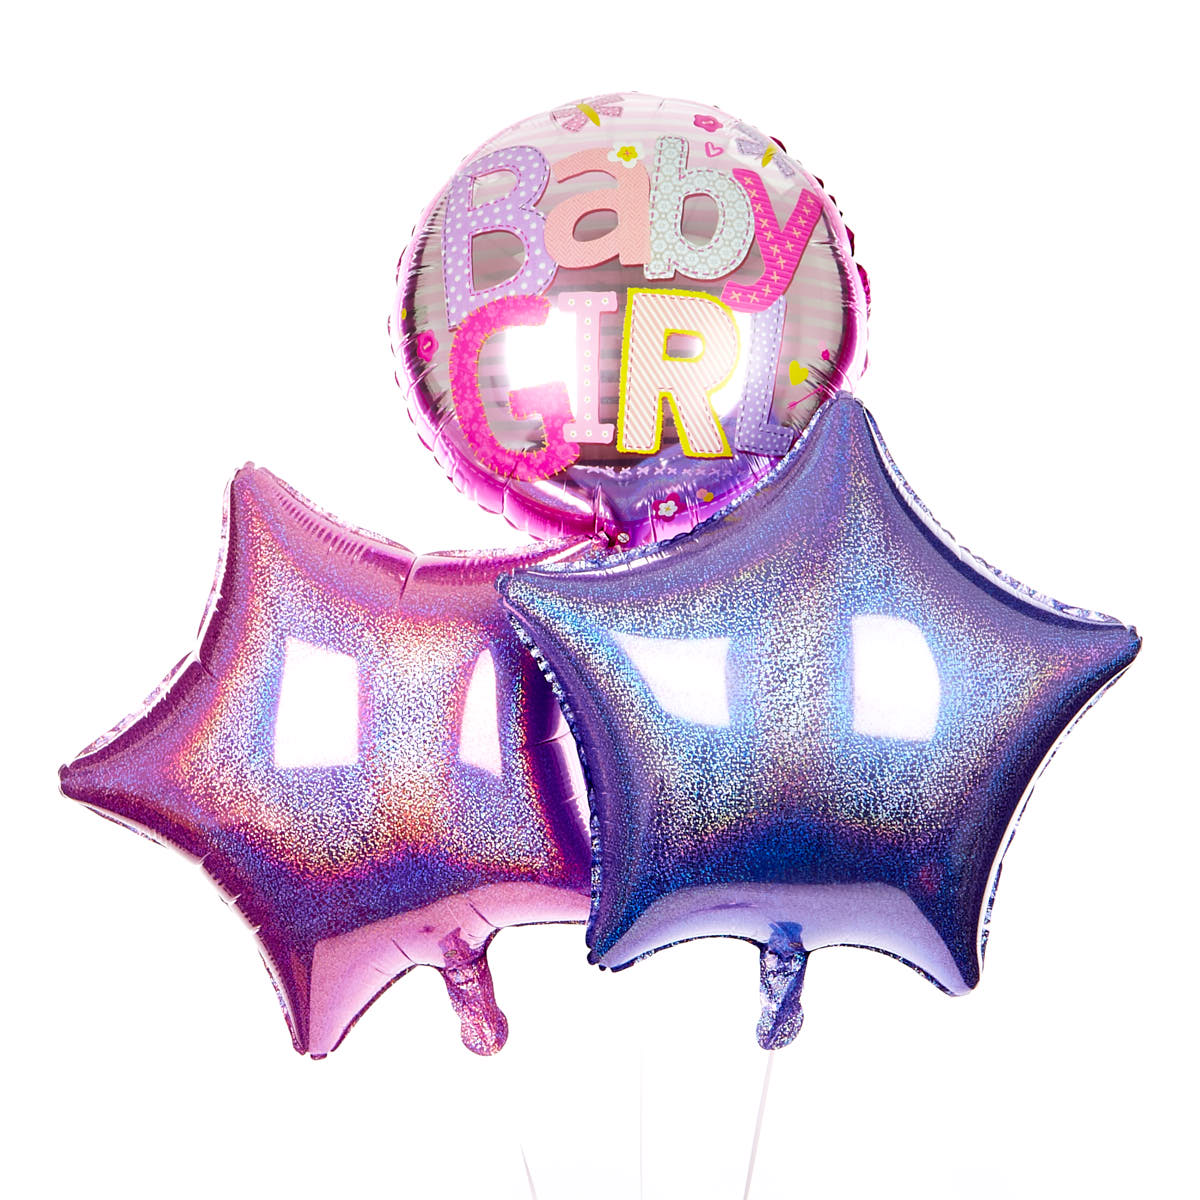 Pink and Lilac Baby Girl Balloon Bouquet - DELIVERED INFLATED!